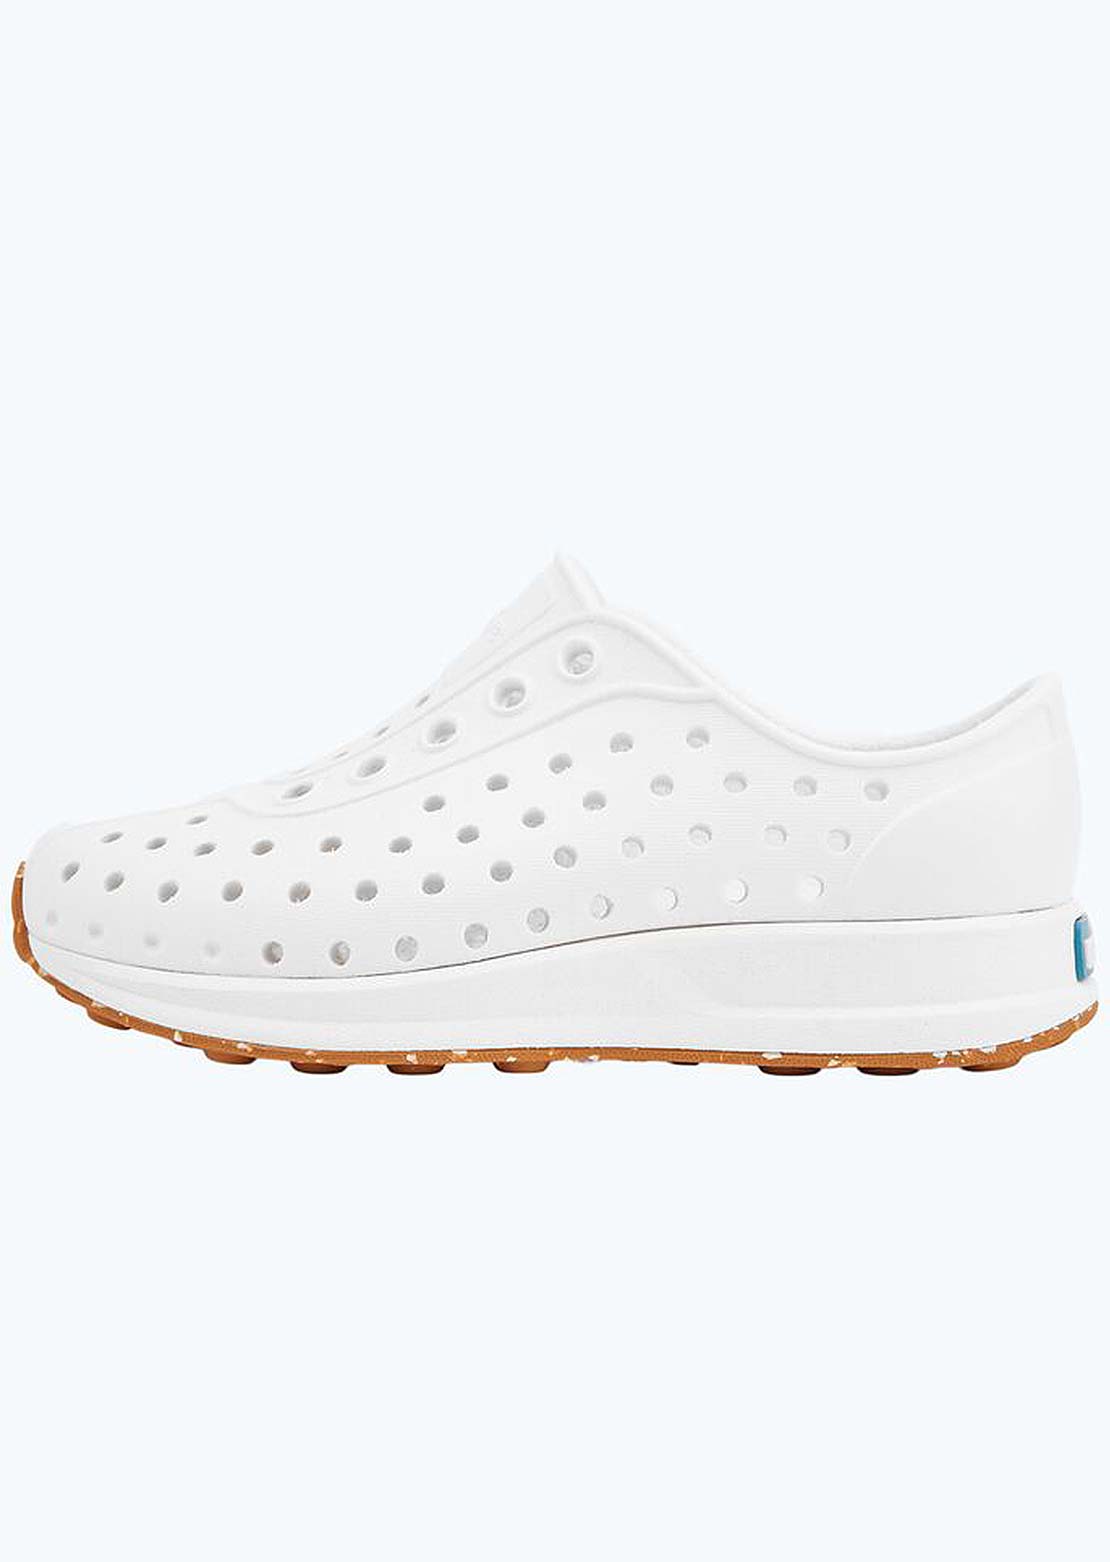 Native Junior Robbie Shoes Shell White/Shell White/Mash Speckle Rubber